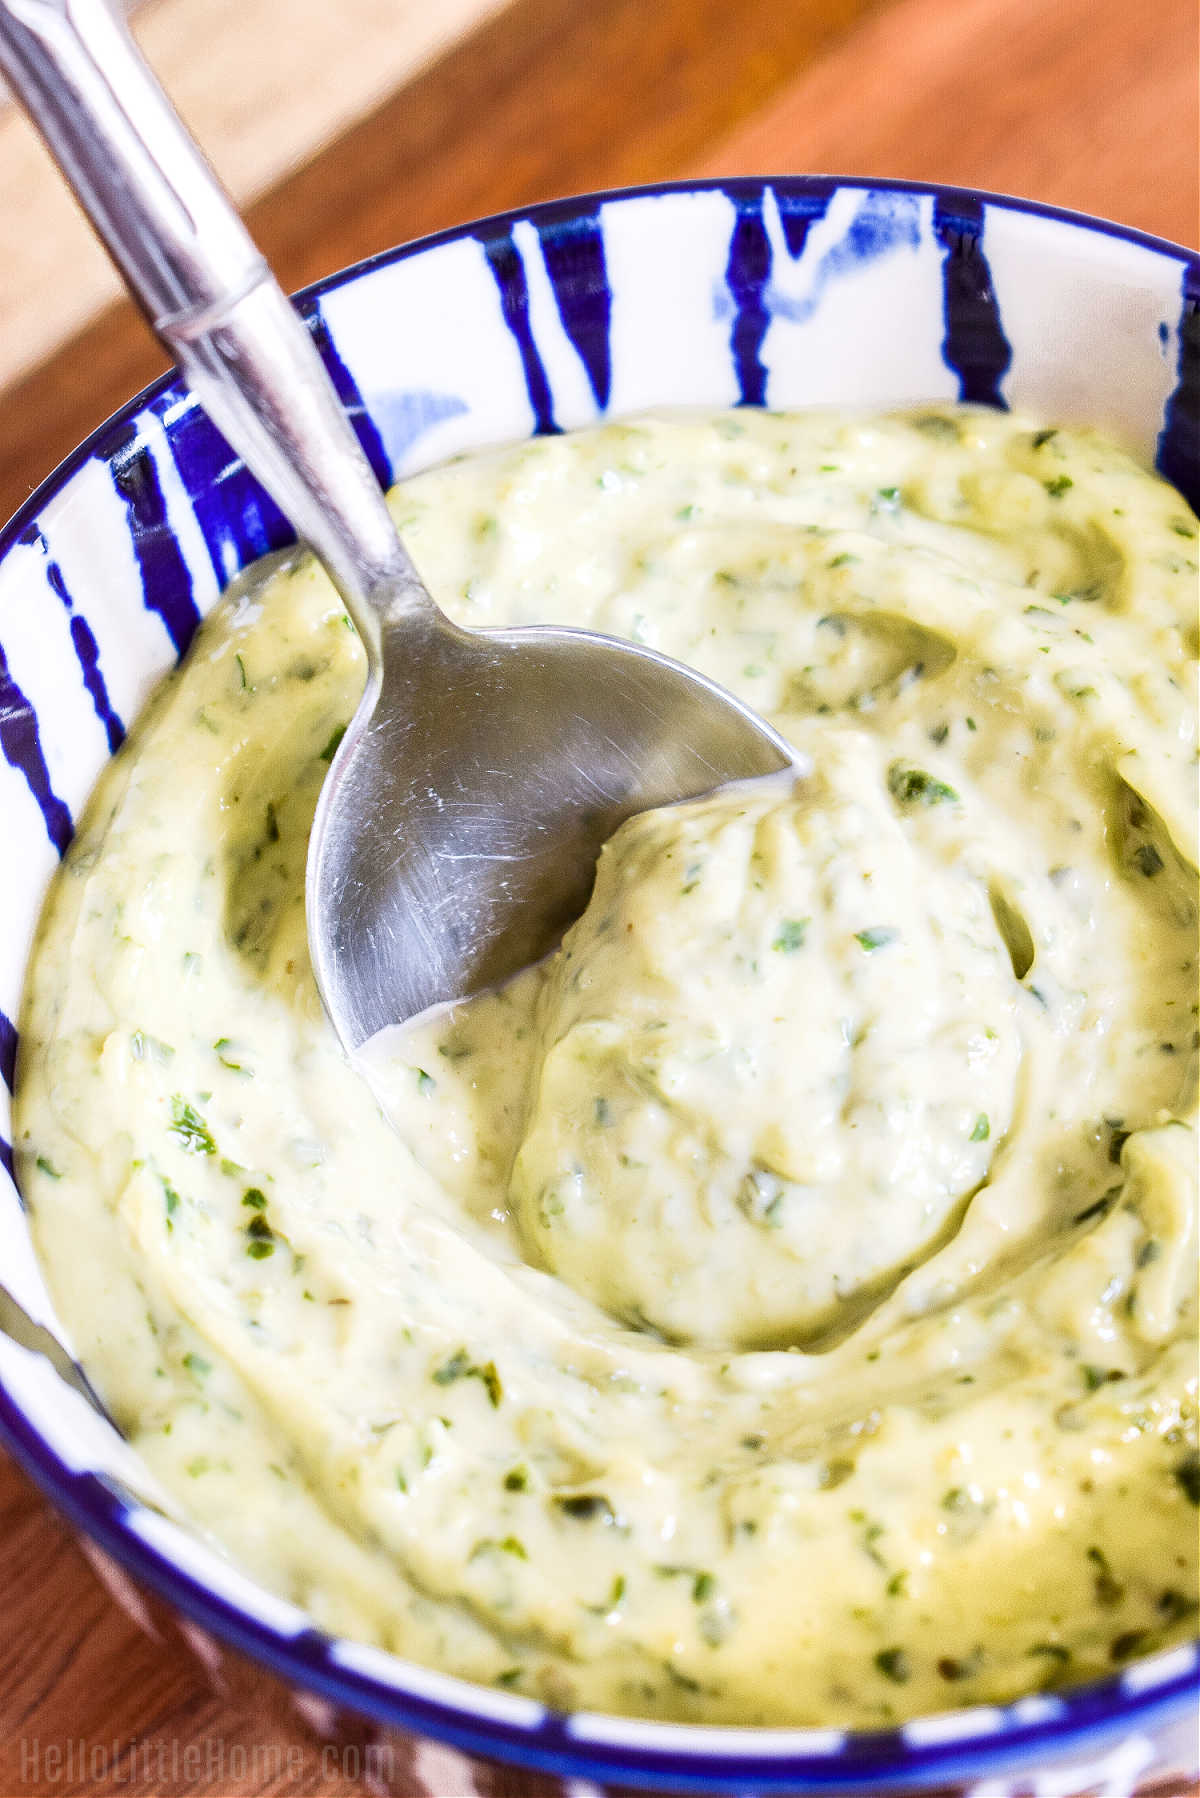 A spoon stirring the finished pesto mayonnaise sauce.